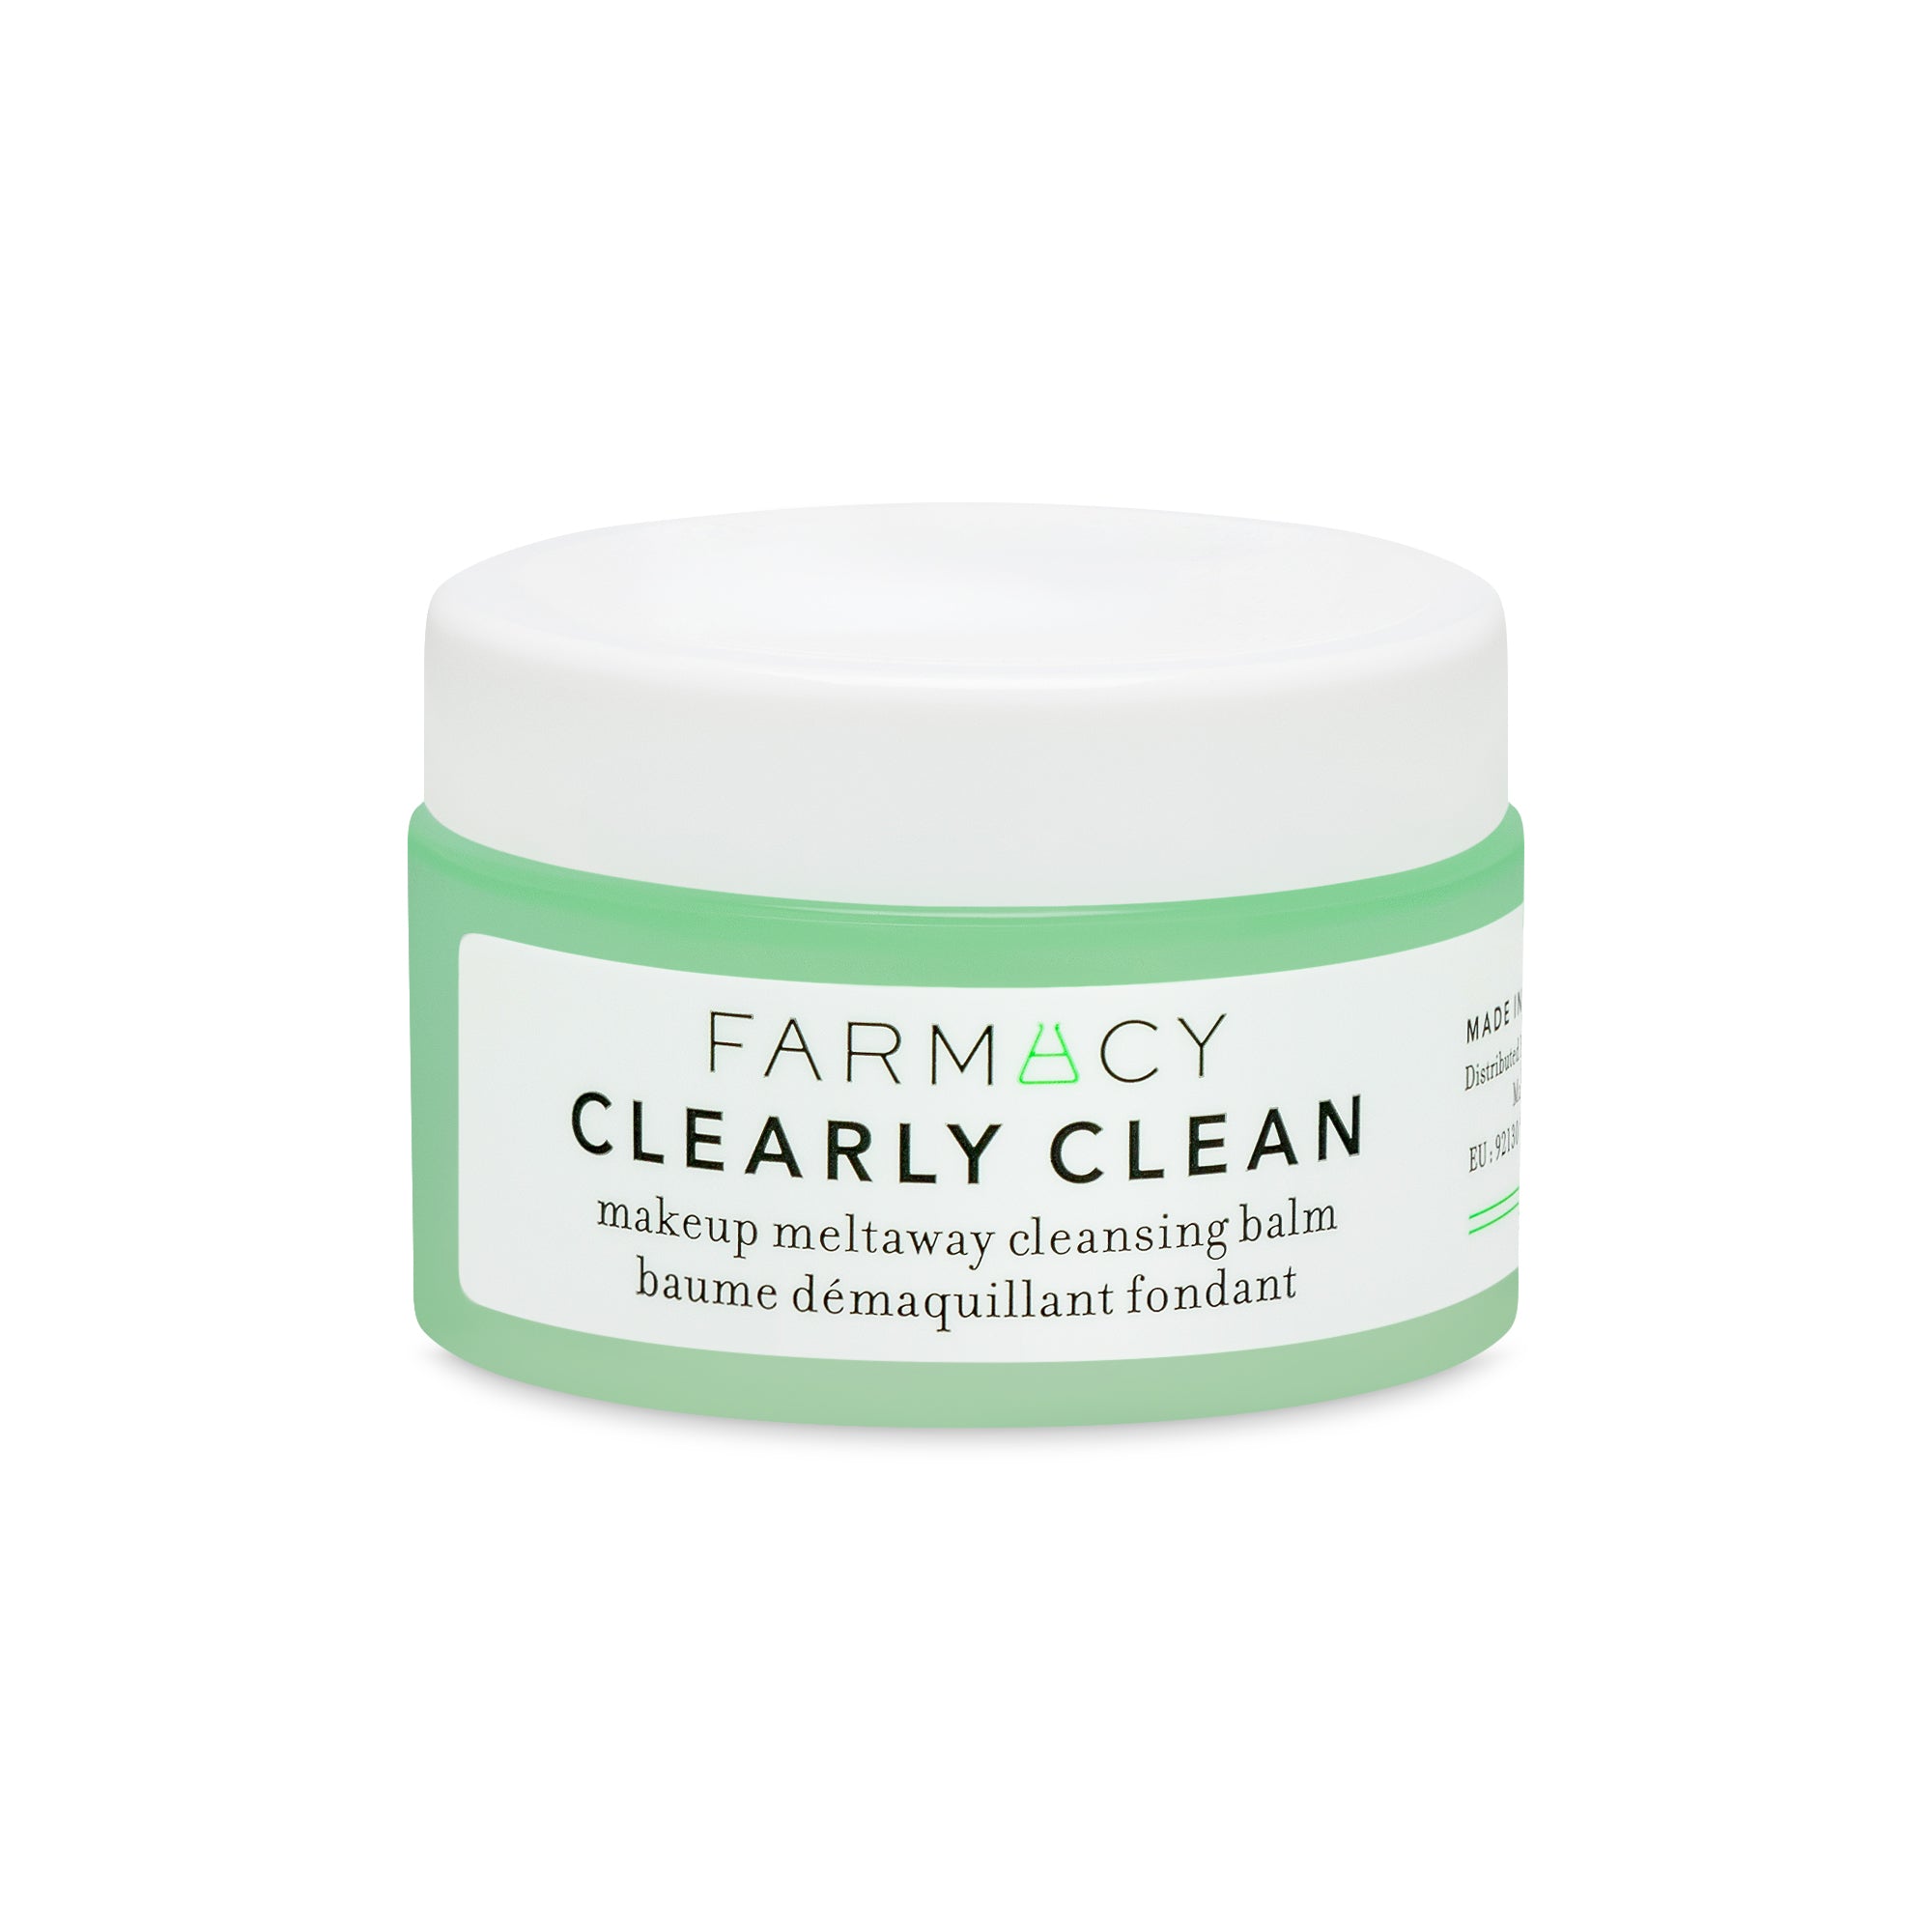 Free Clearly Clean Trial Size